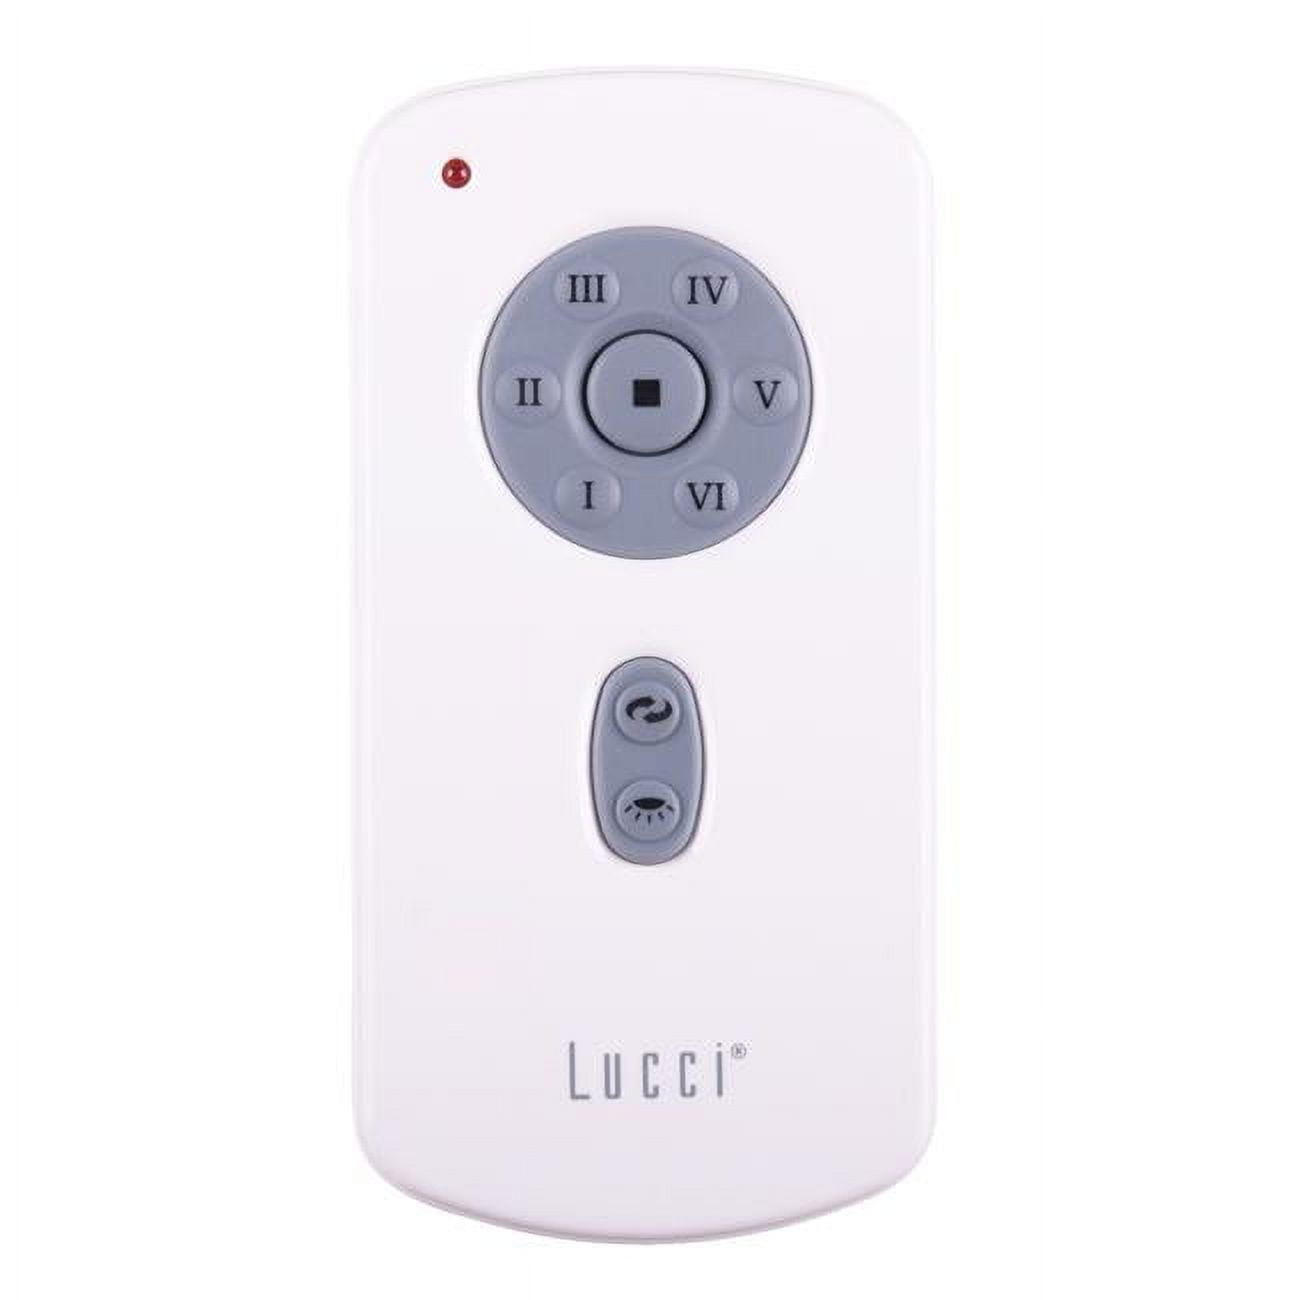 Picture of Lucci Air 52052802 Climate White Ceiling Fan Remote Control with Wall Mount